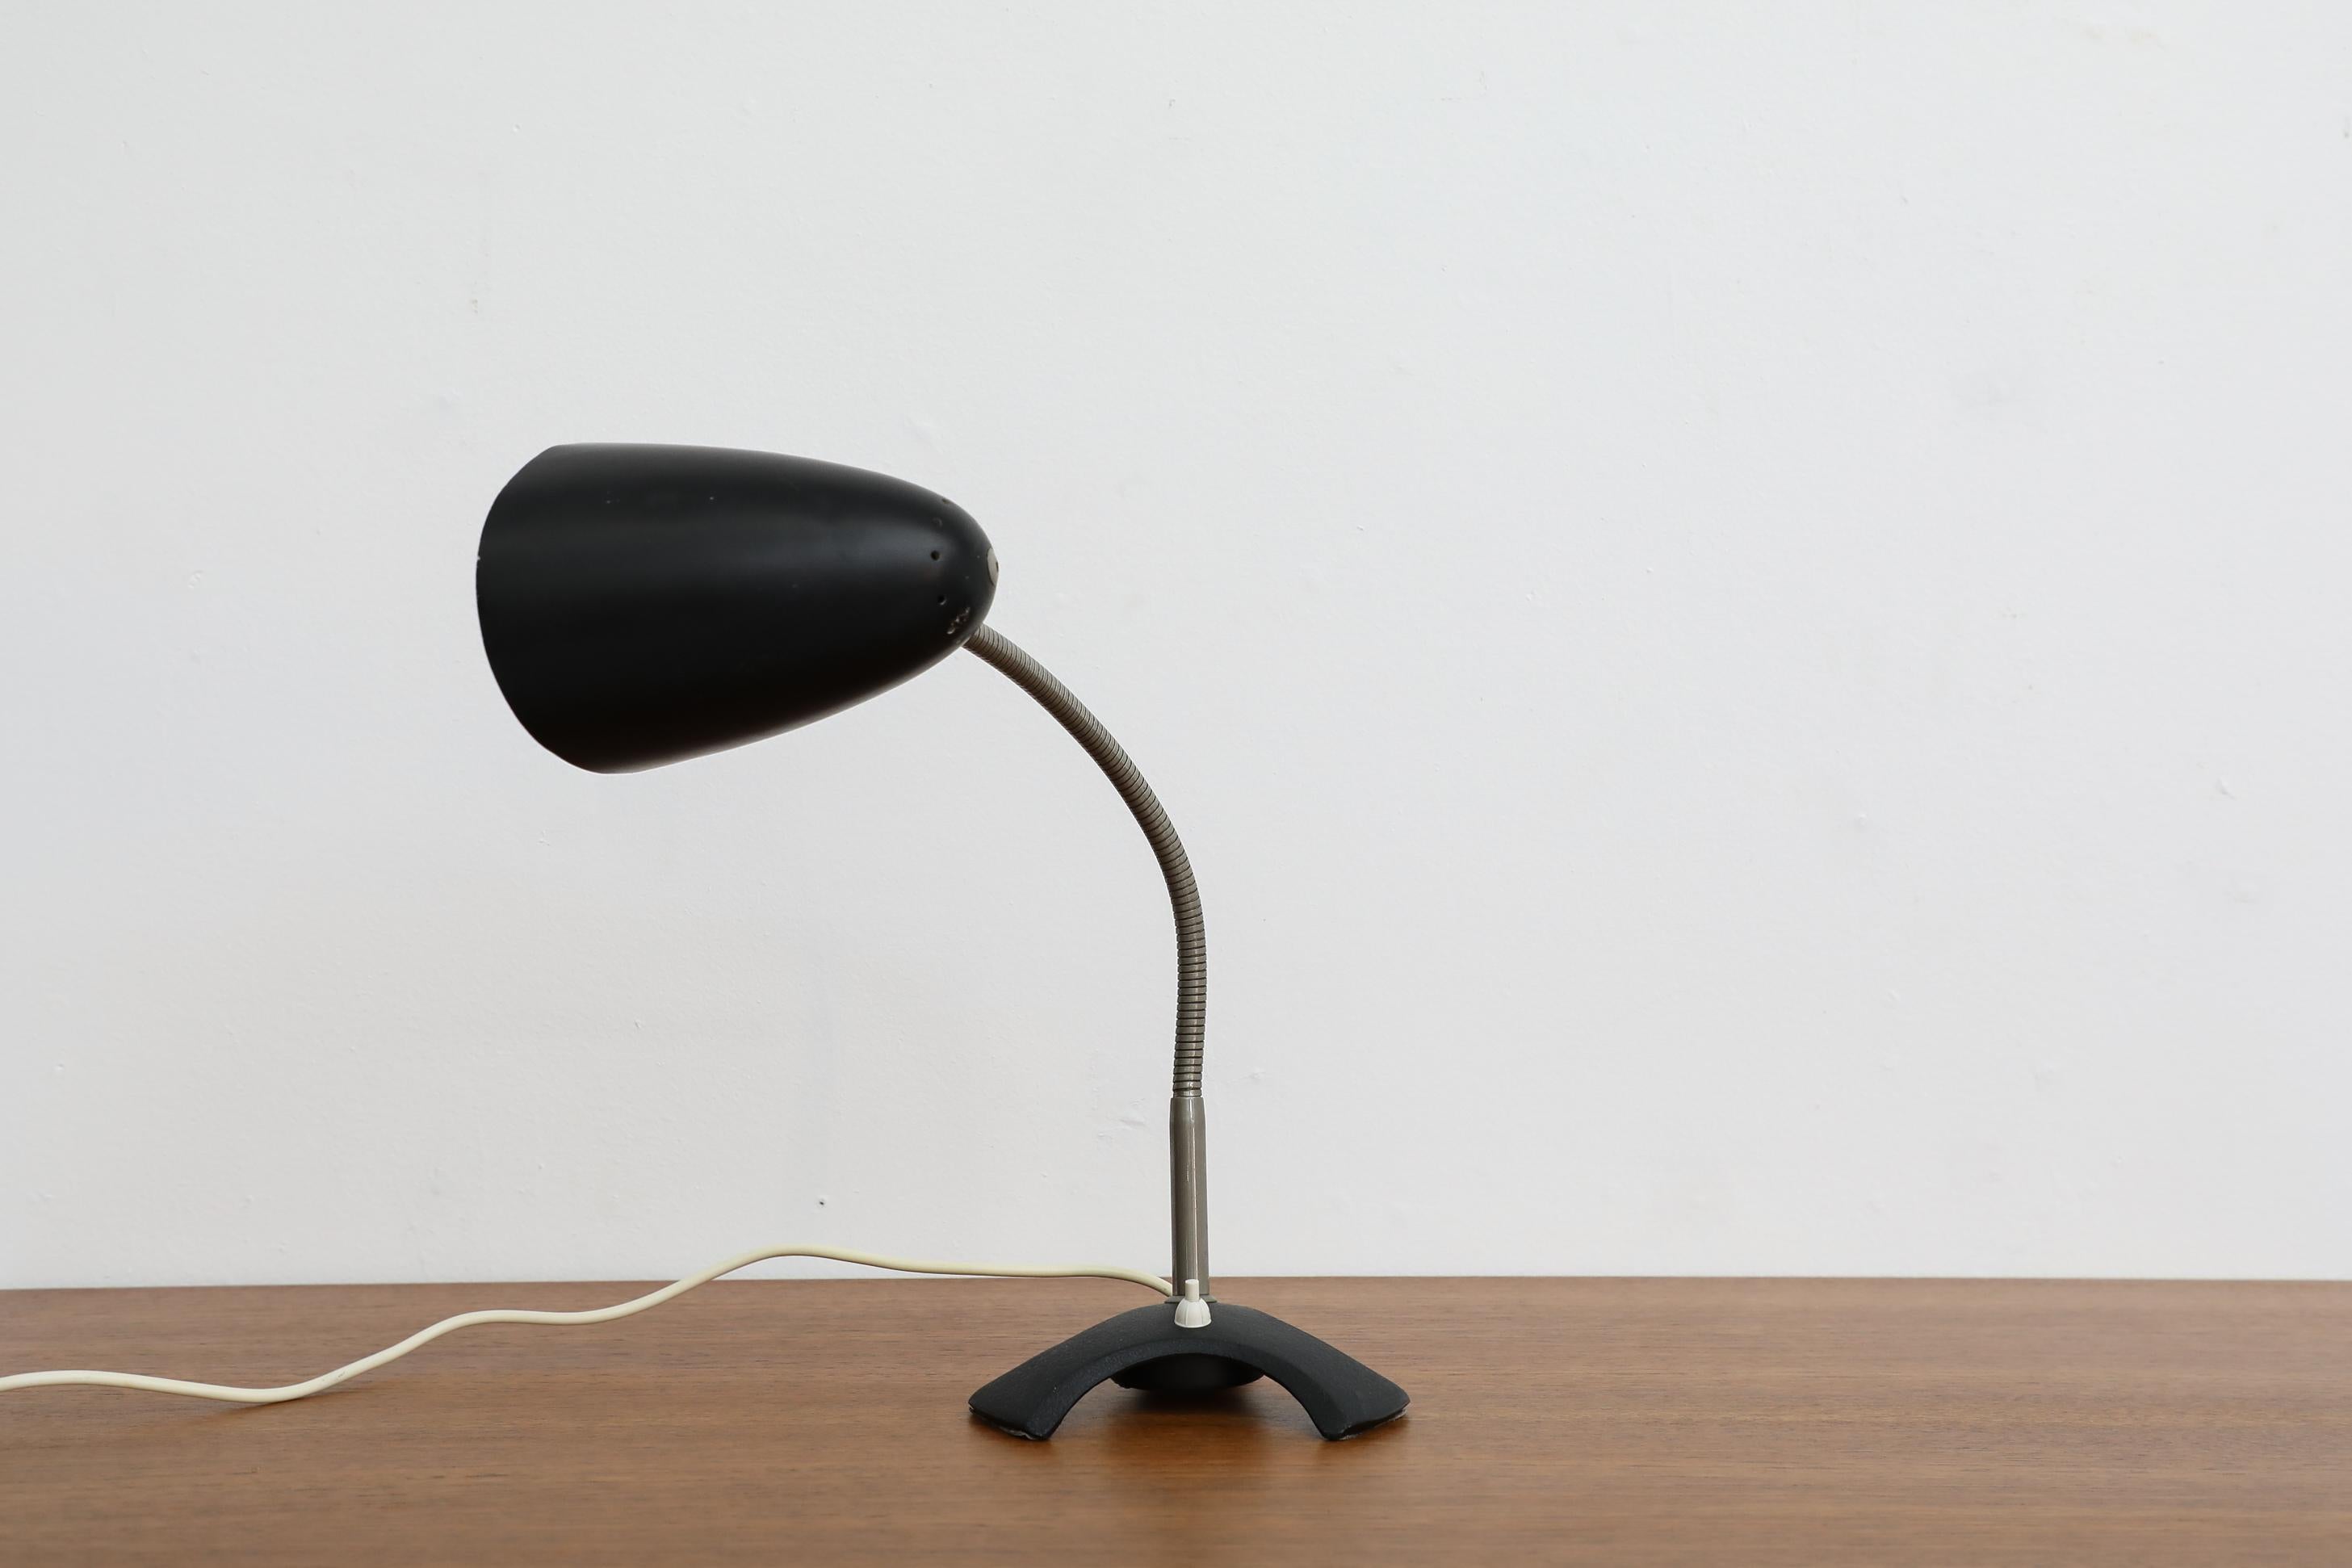 Black Enameled Bauhaus Goose Neck Desk Lamp In Good Condition For Sale In Los Angeles, CA